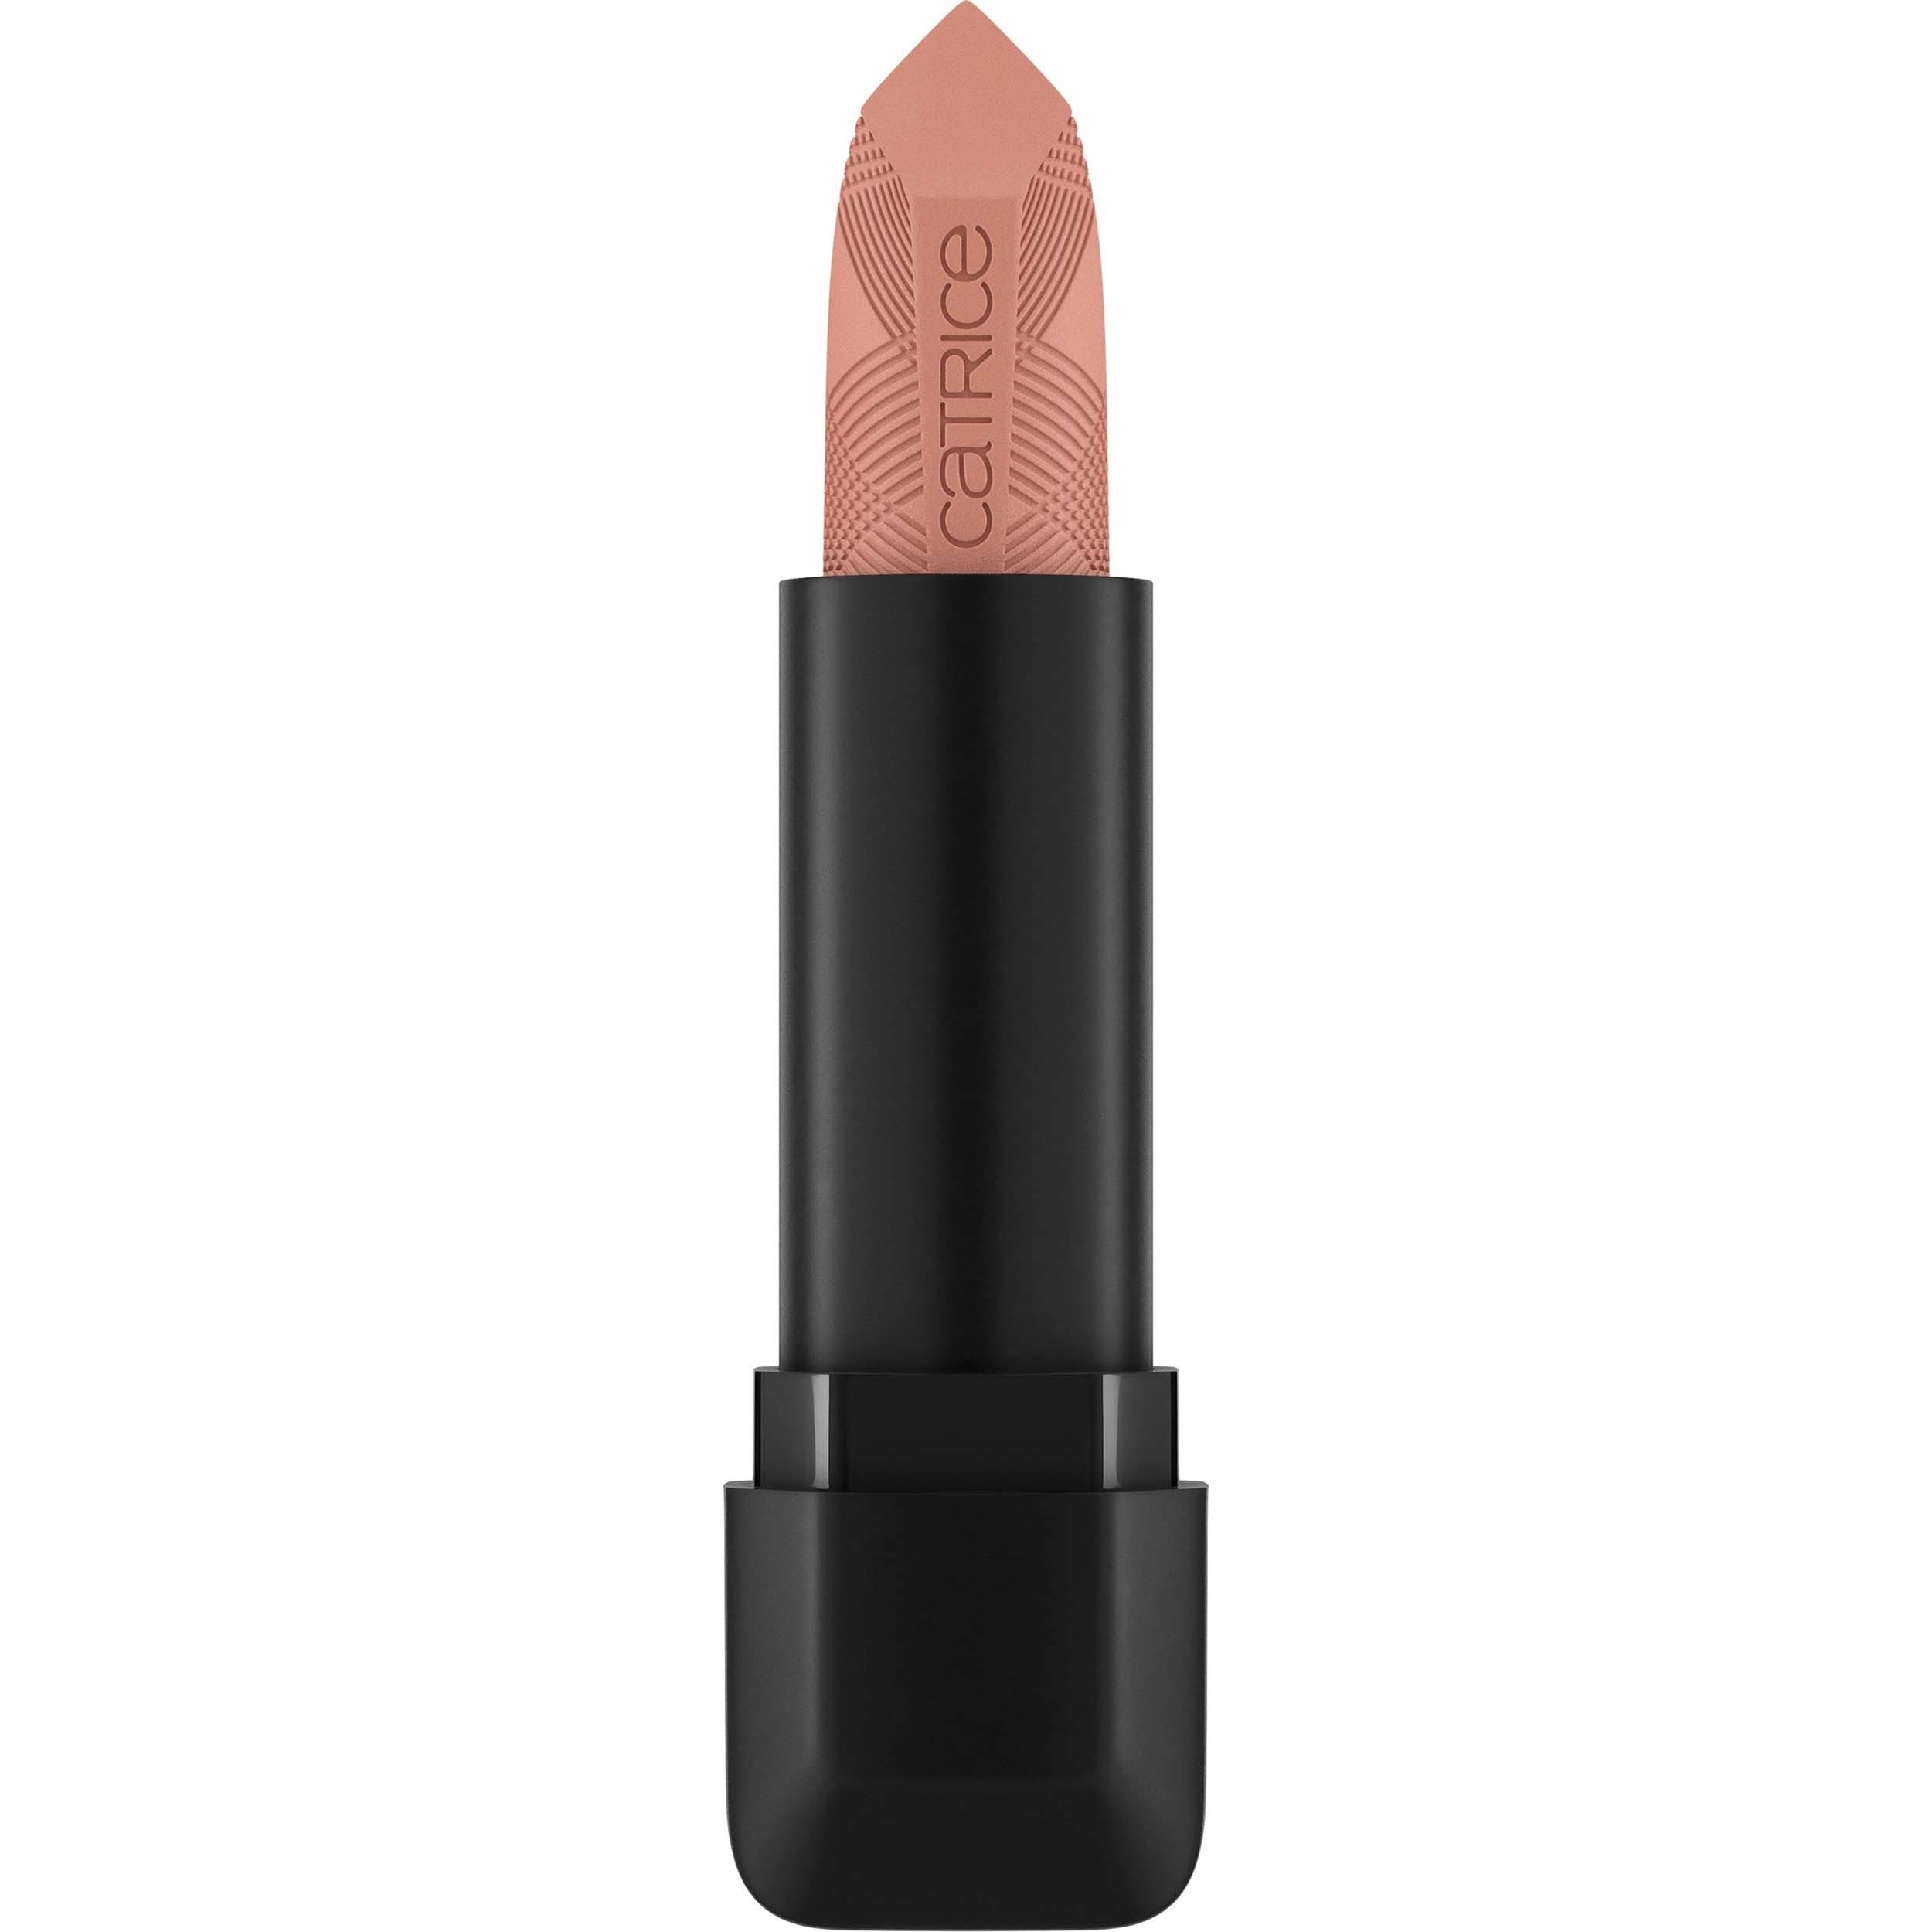 Catrice Cosmetics Scandalous Matte Lipstick 3.5g 020 Nude Obsession